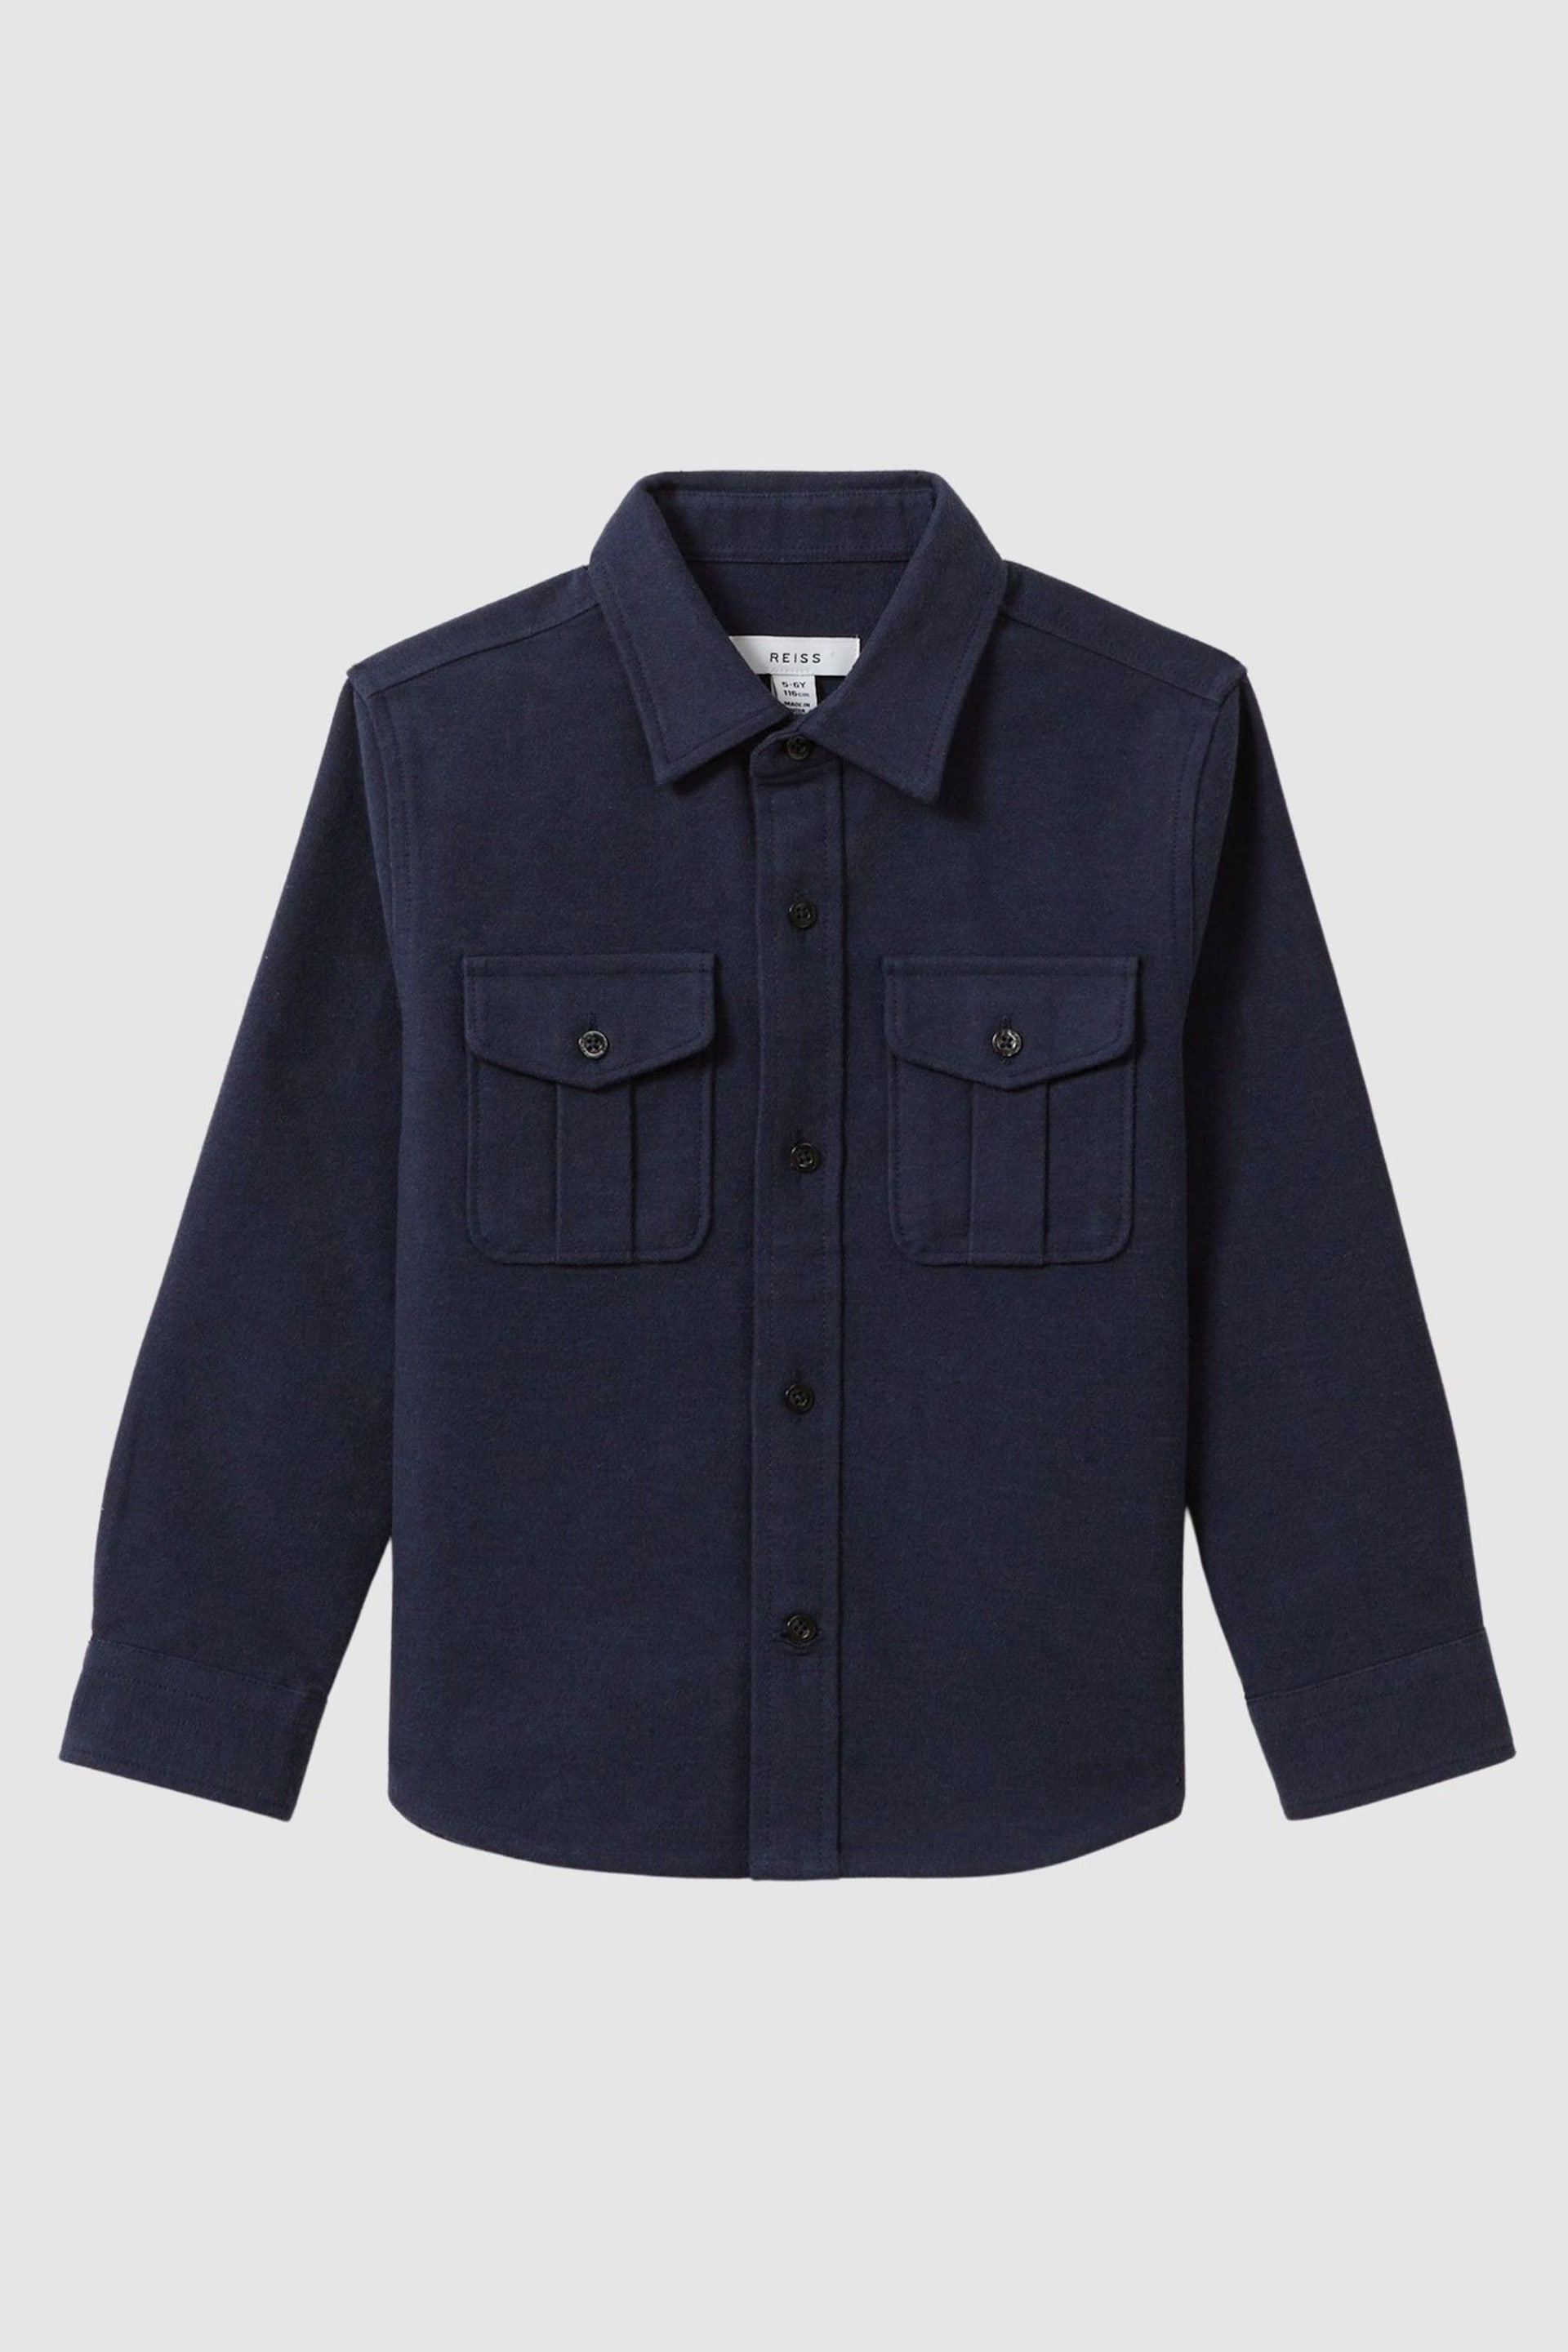 Reiss Eclipse Blue Thomas Junior Brushed Cotton Patch Pocket Overshirt - Image 2 of 6